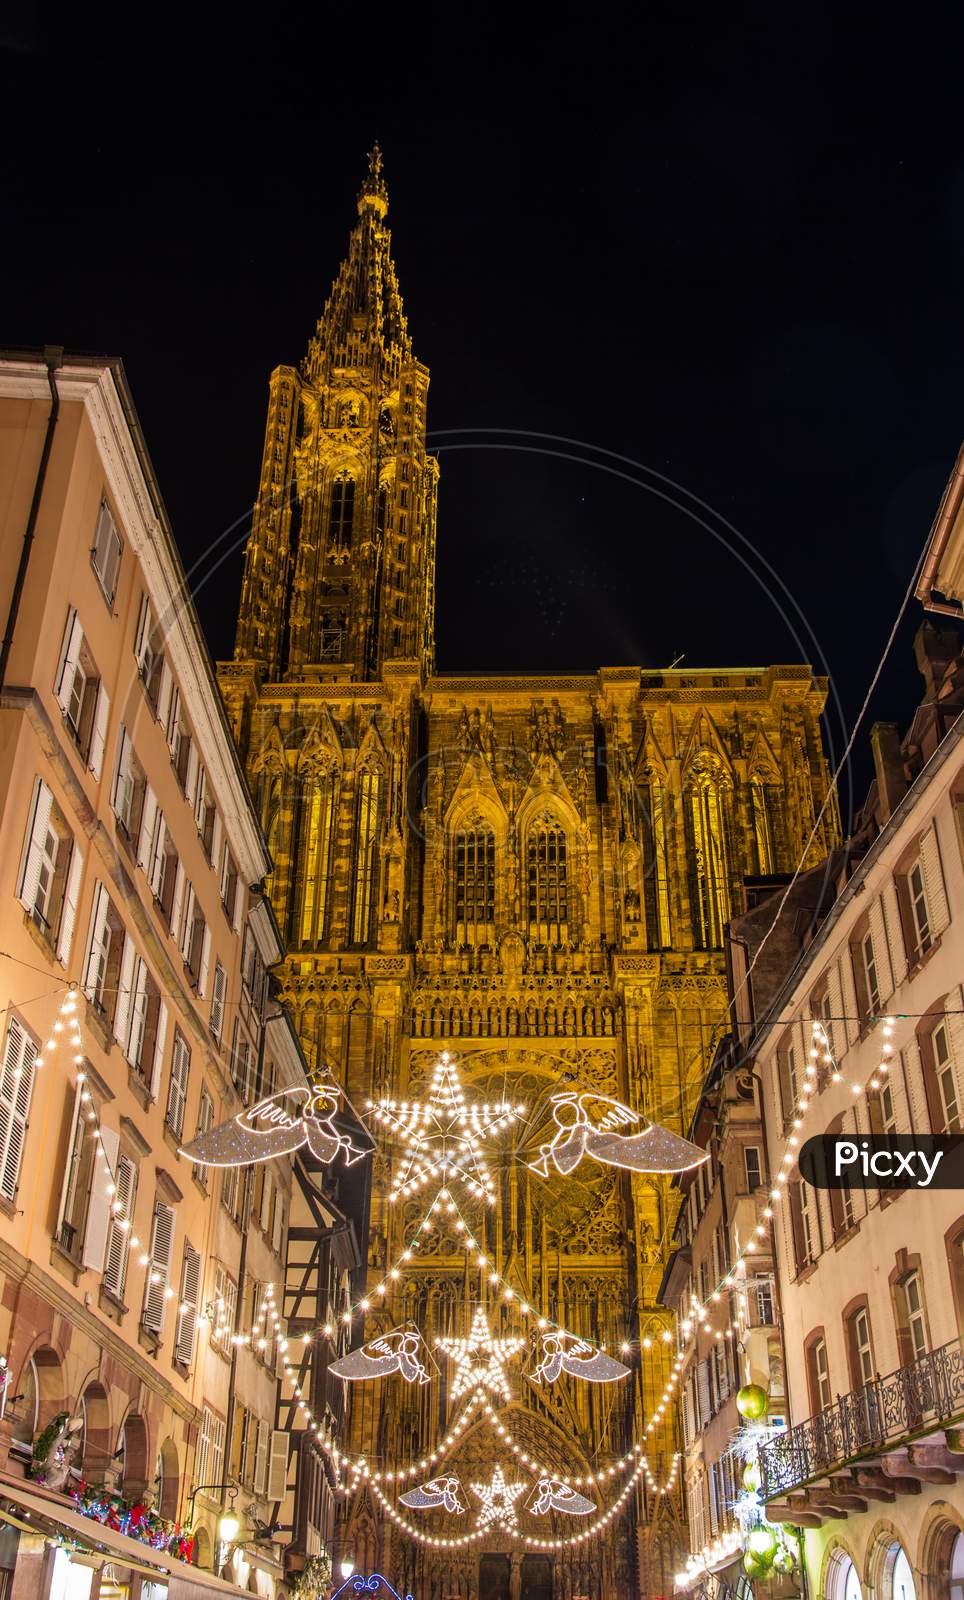 Christmas Decorations Near The Cathedral - Strasbourg, "Capital